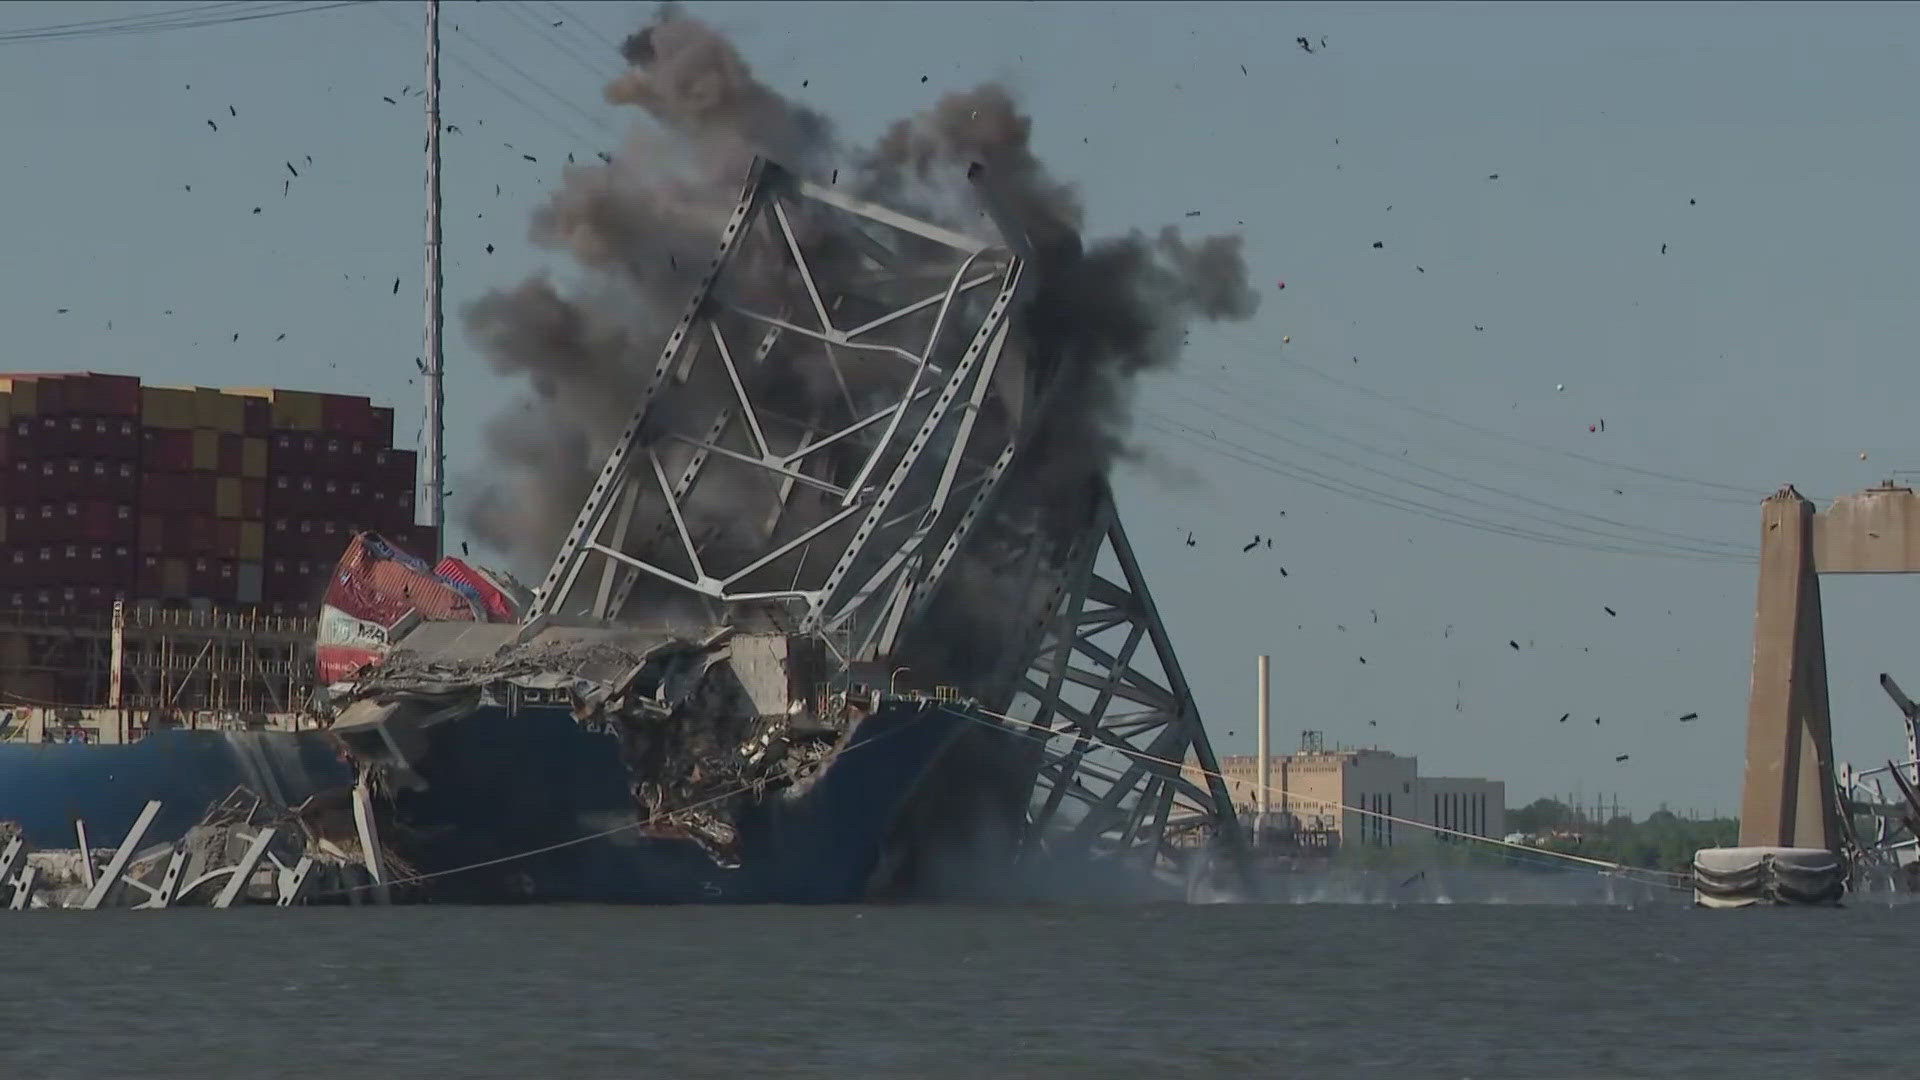 NTSB released preliminary investigation, the main engine automatically shut down and the rudder was inoperable.